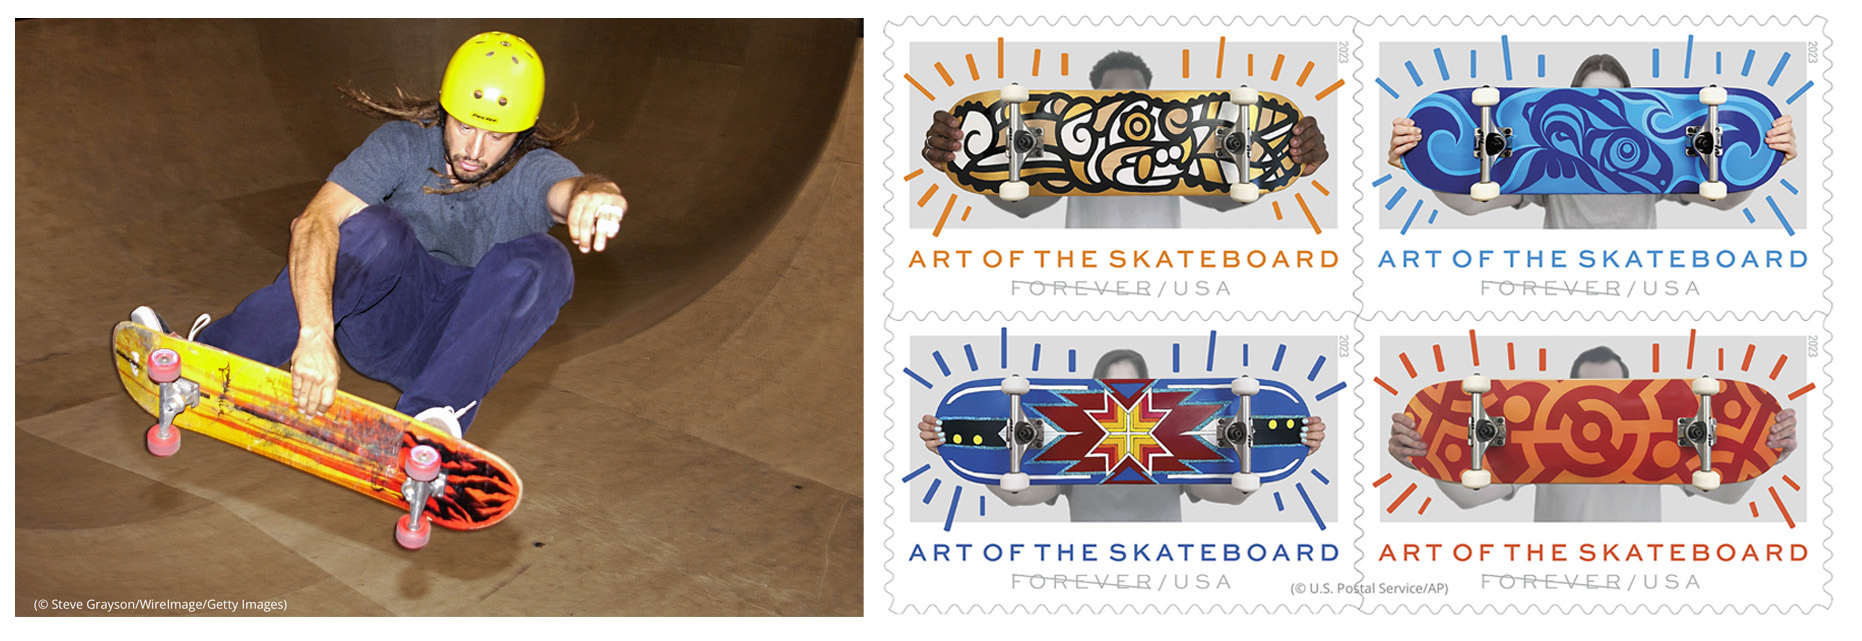 Left photo: Man performing skateboard trick (© Steve Grayson/WireImage/Getty Images) Right image: "Art of the Skateboard" stamps (© U.S. Postal Service/AP)